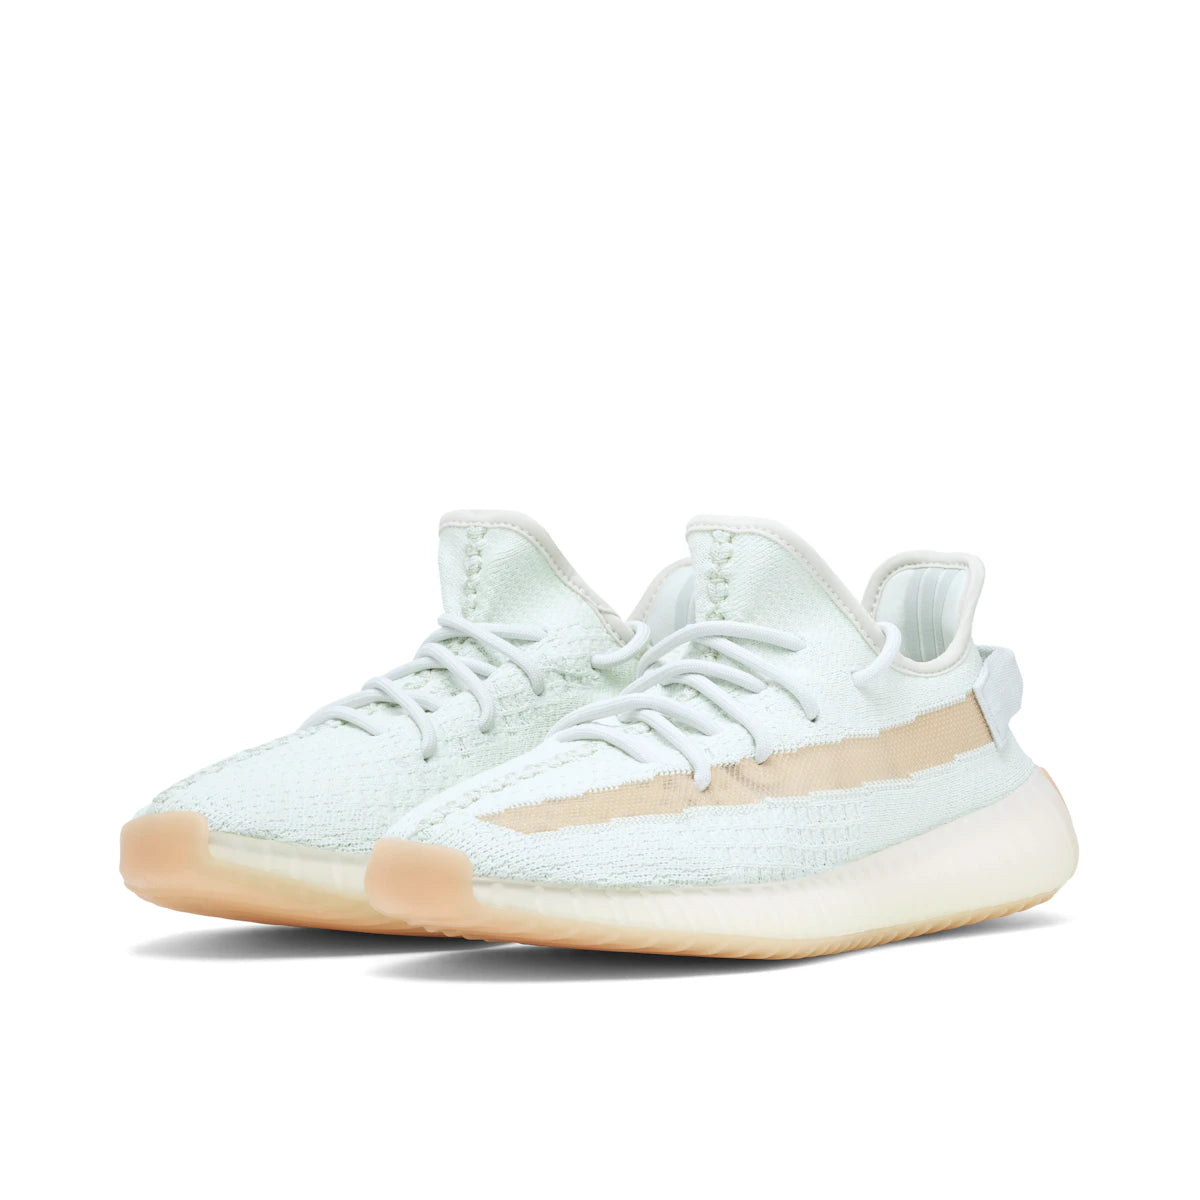 Adidas Yeezy Boost 350 V2 Hyperspace by Yeezy from £295.00